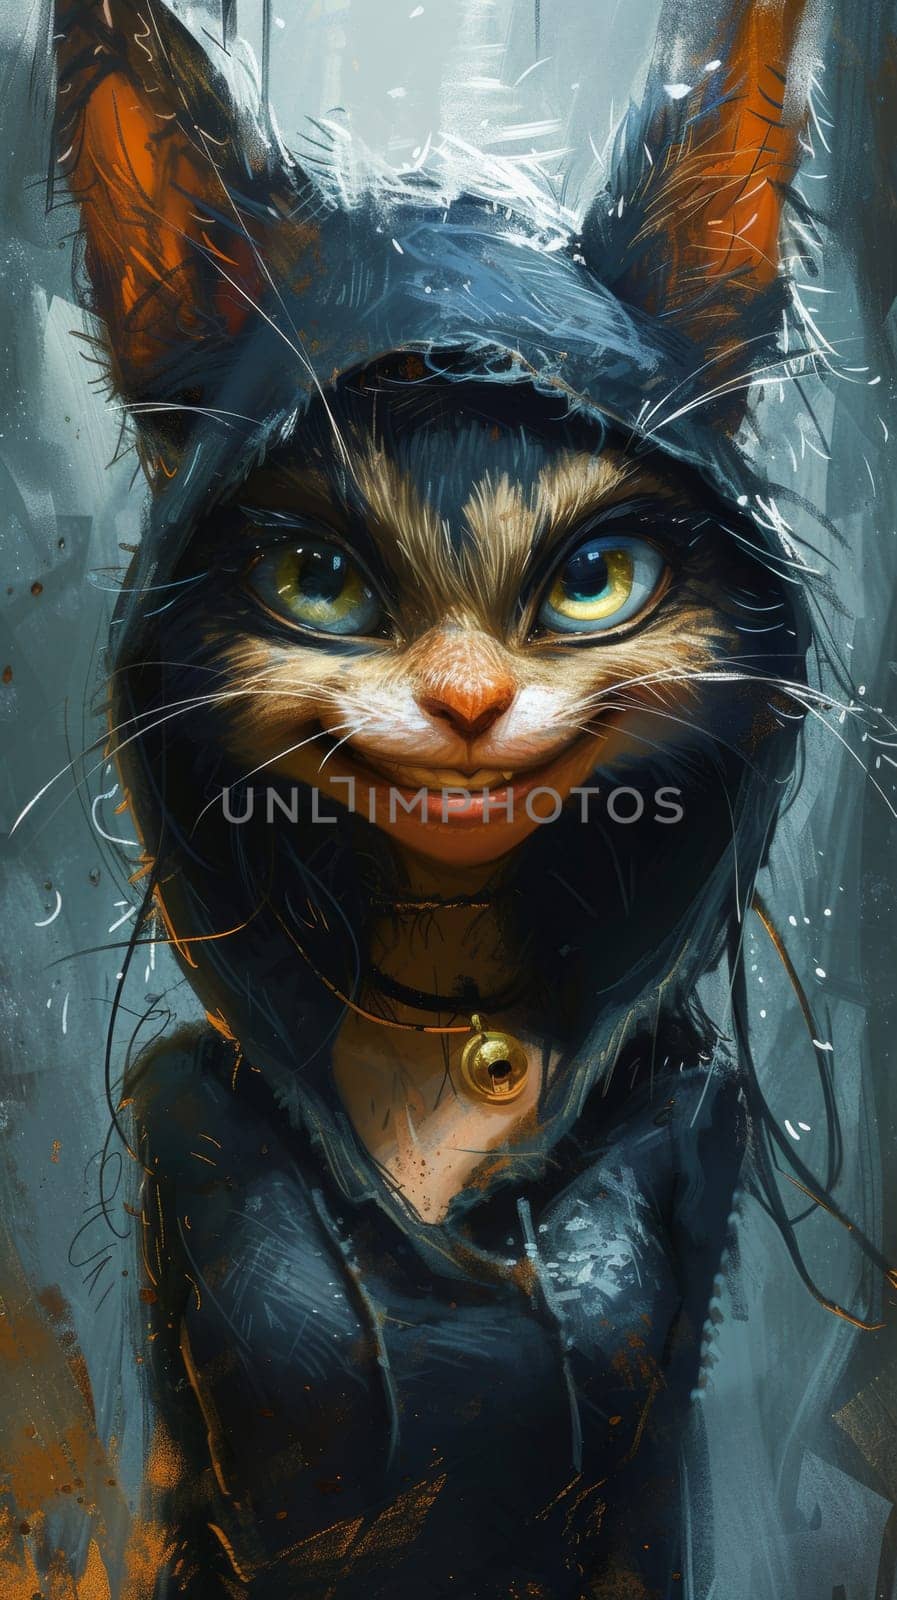 A painting of a cat wearing an hoodie and smiling